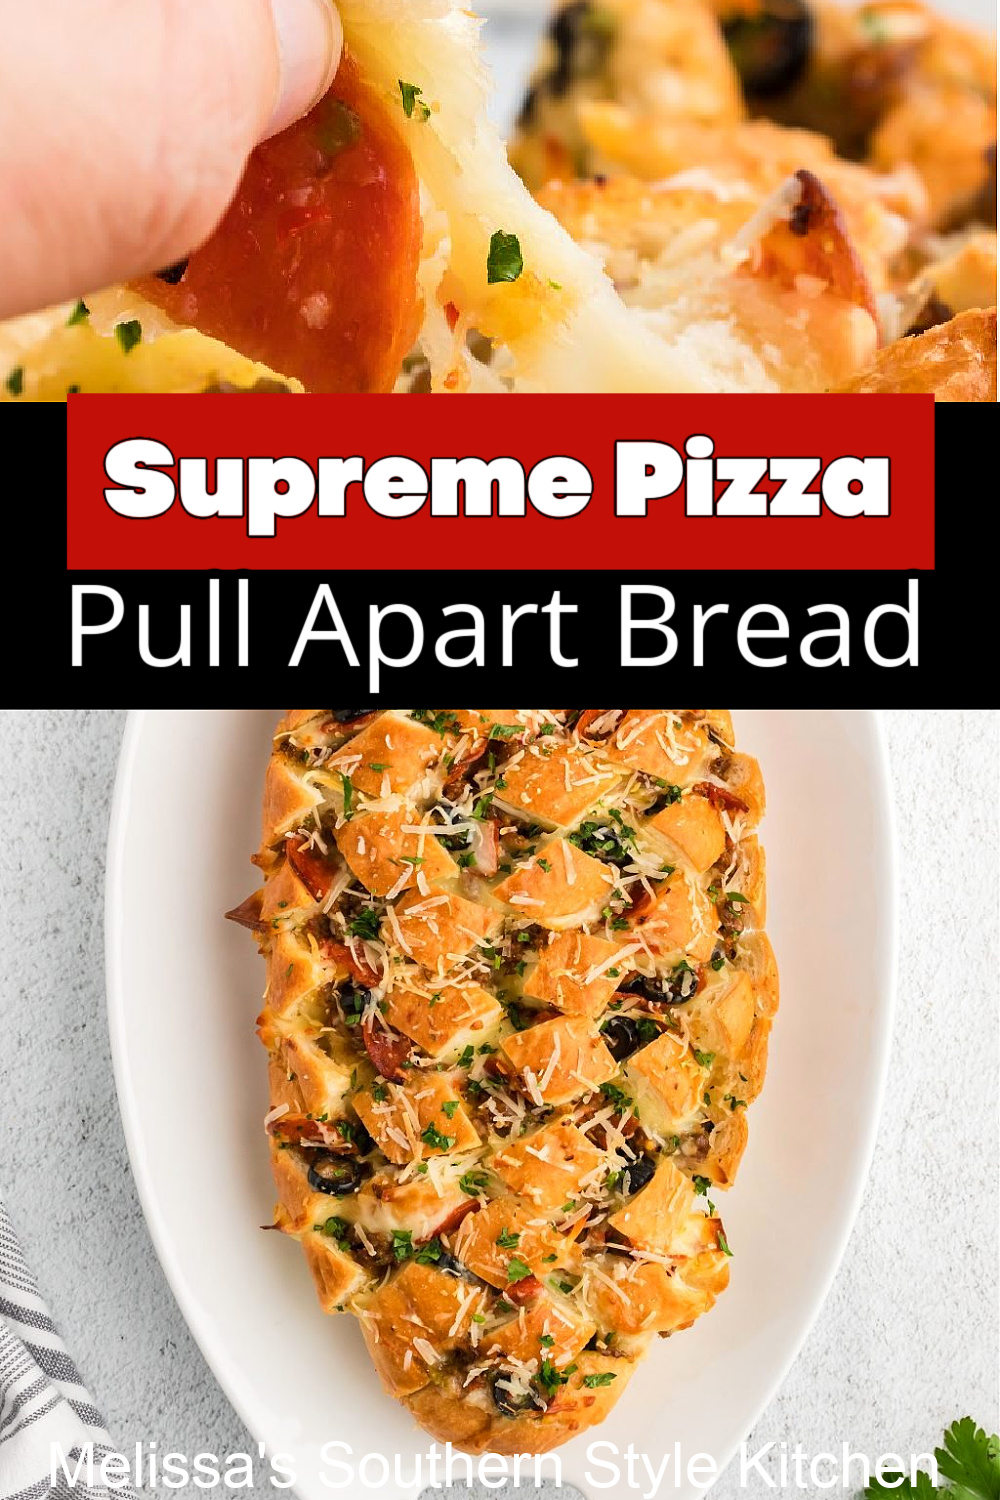 This irresistible Supreme Pizza Pull Apart Bread turns an inexpensive loaf of bread into a delicious gooey treat #pizzabread #pullapartbread #pizzarecipes #frenchbread #appetizers #superbowlparty #partyrecipes #easypizzarecipes